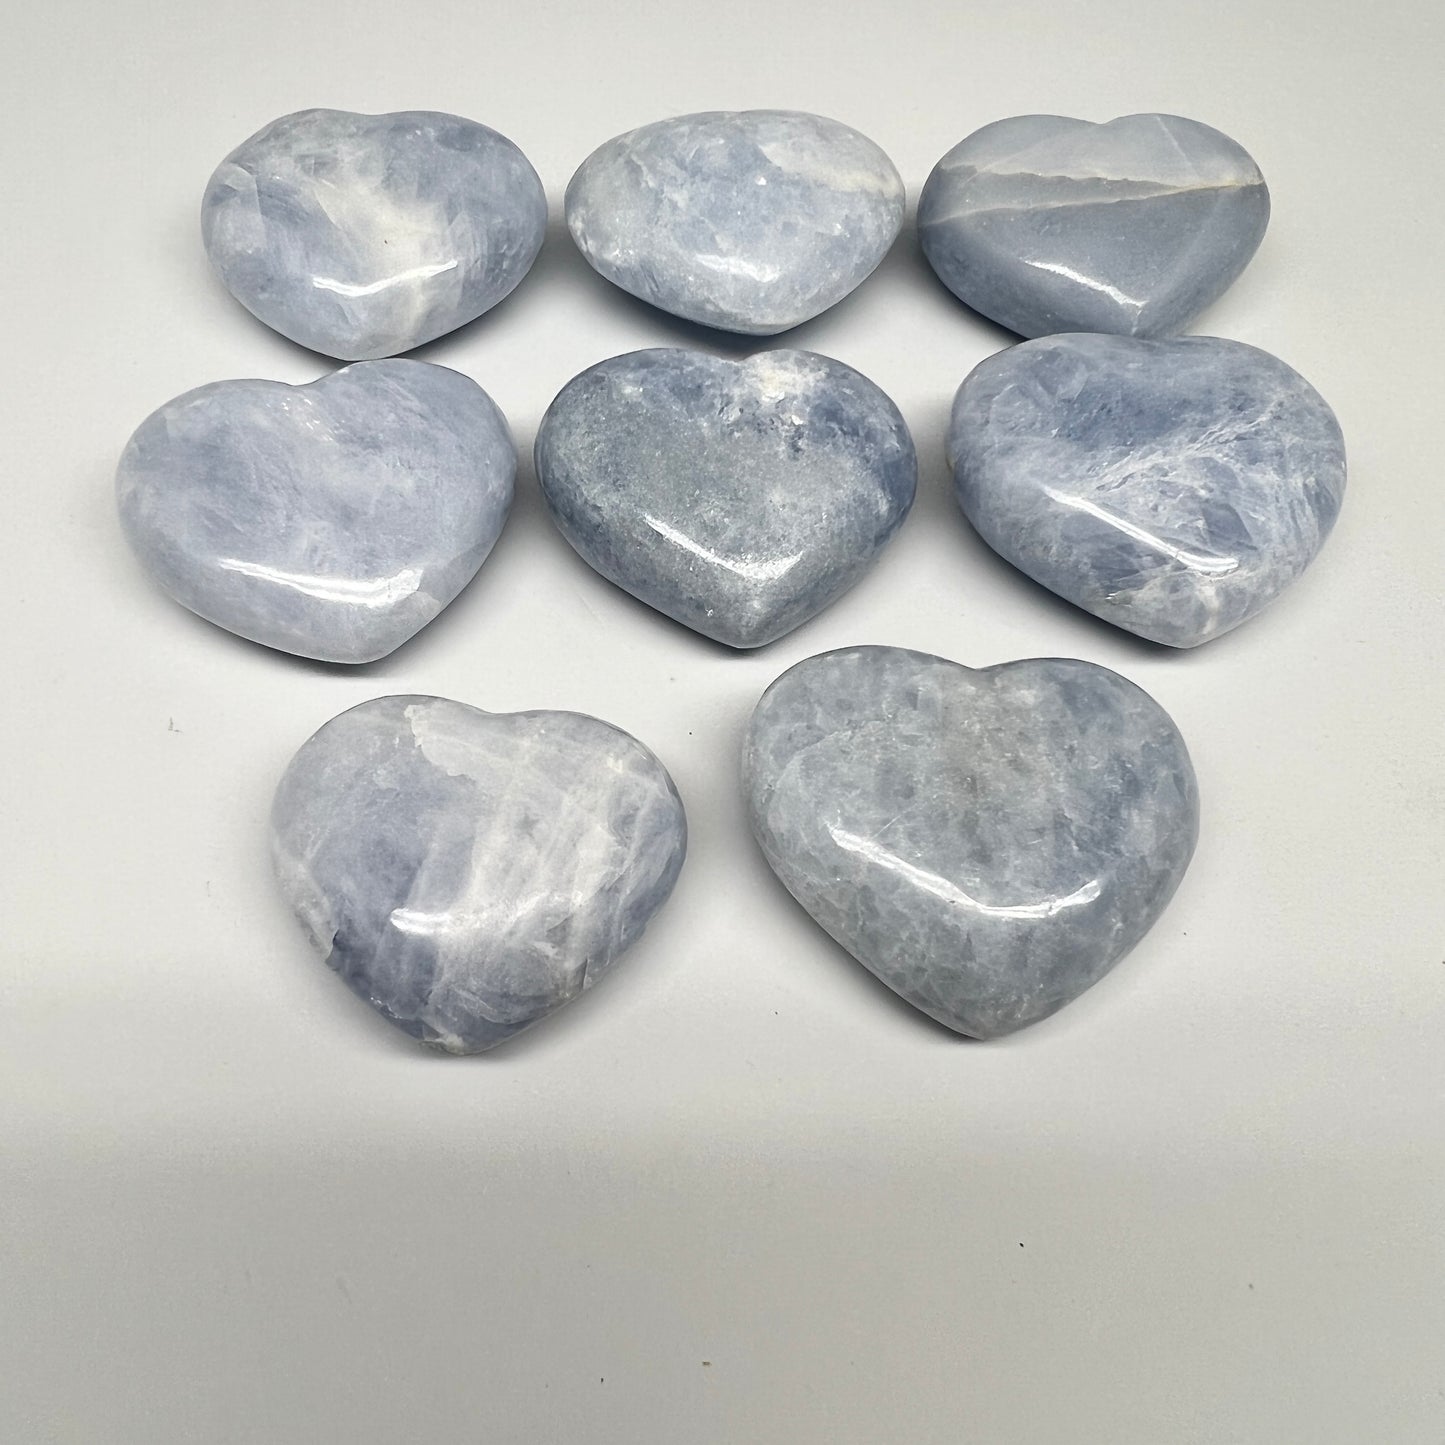 1025g (2.2 lbs) , 8 pcs, 1.9"- 2.2", Blue Calcite Hearts from Madagascar, B20855